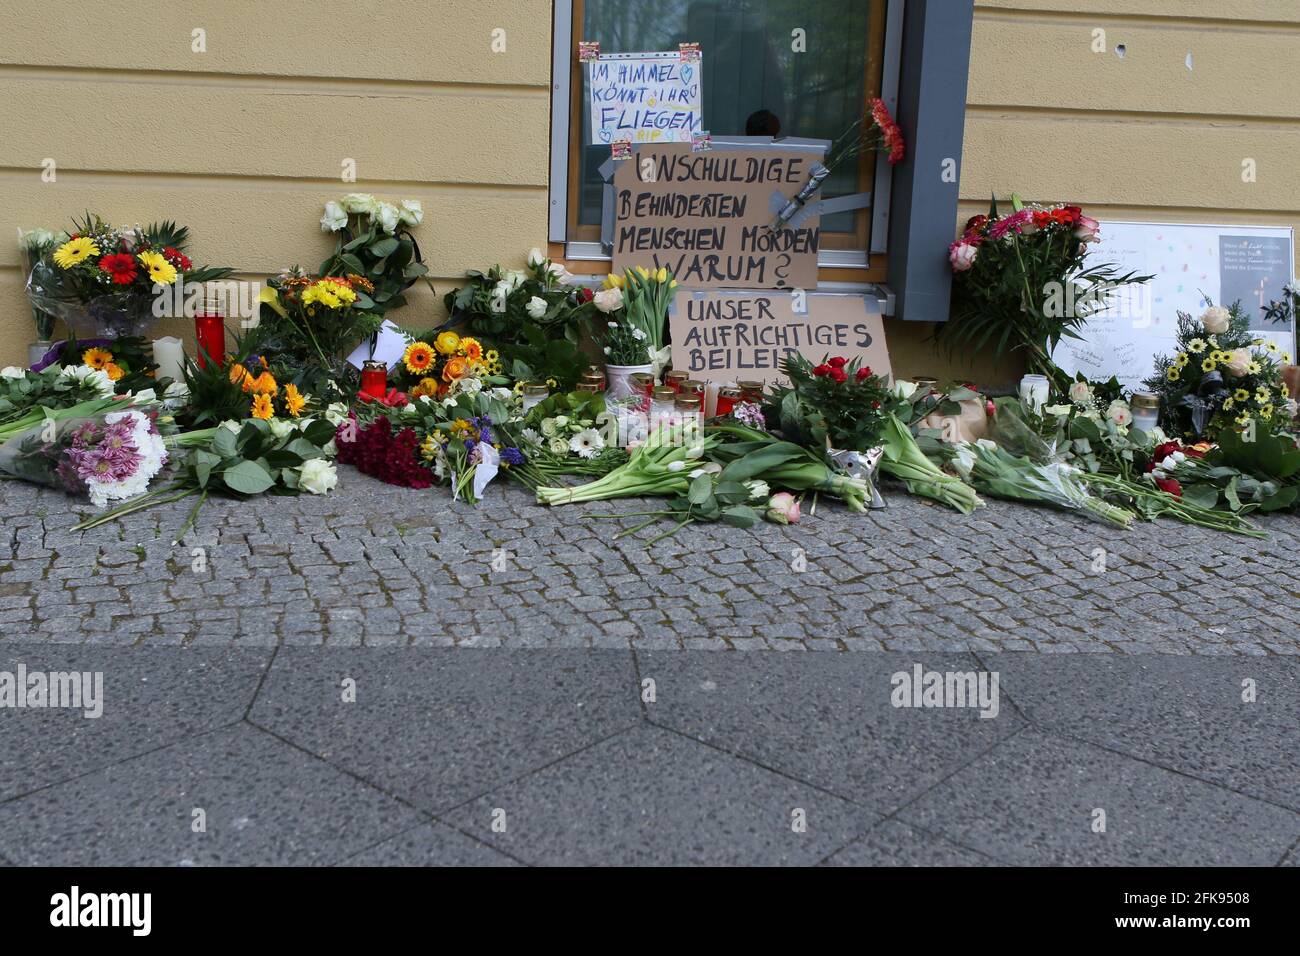 04/29/2021, Potsdam, Germany,. Flowers and signs in front of the house. Four dead were discovered in the 'Oberlin-Lebenswelten' care facility in Potsdam for people with disabilities. An urgently suspect 51-year-old woman was arrested. The victims have stab wounds. Stock Photo